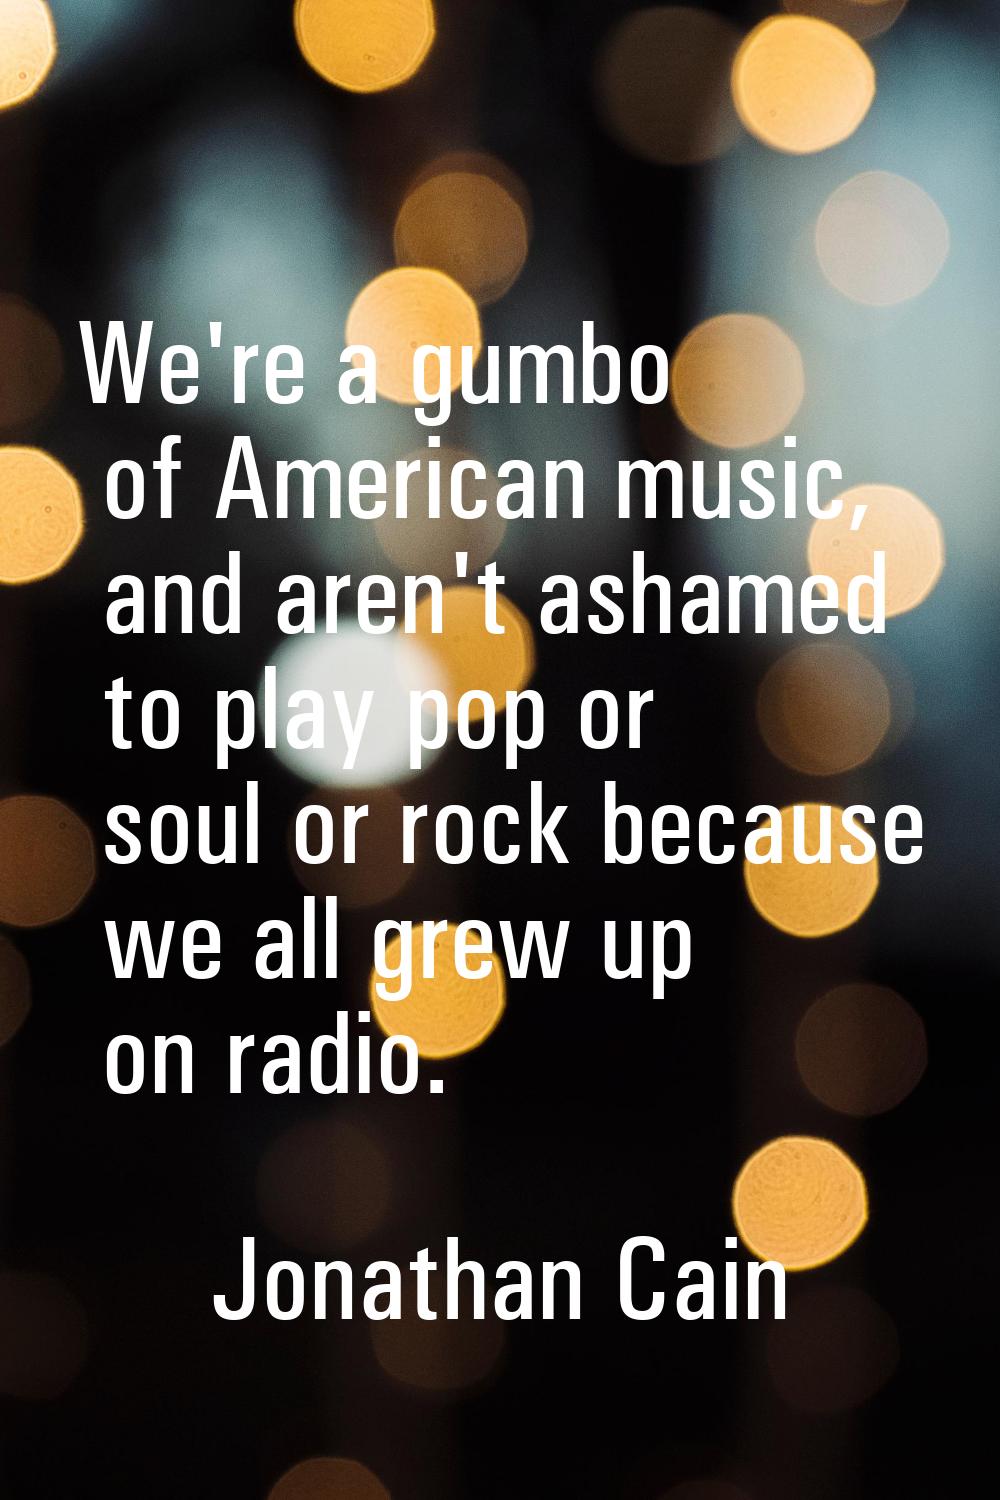 We're a gumbo of American music, and aren't ashamed to play pop or soul or rock because we all grew